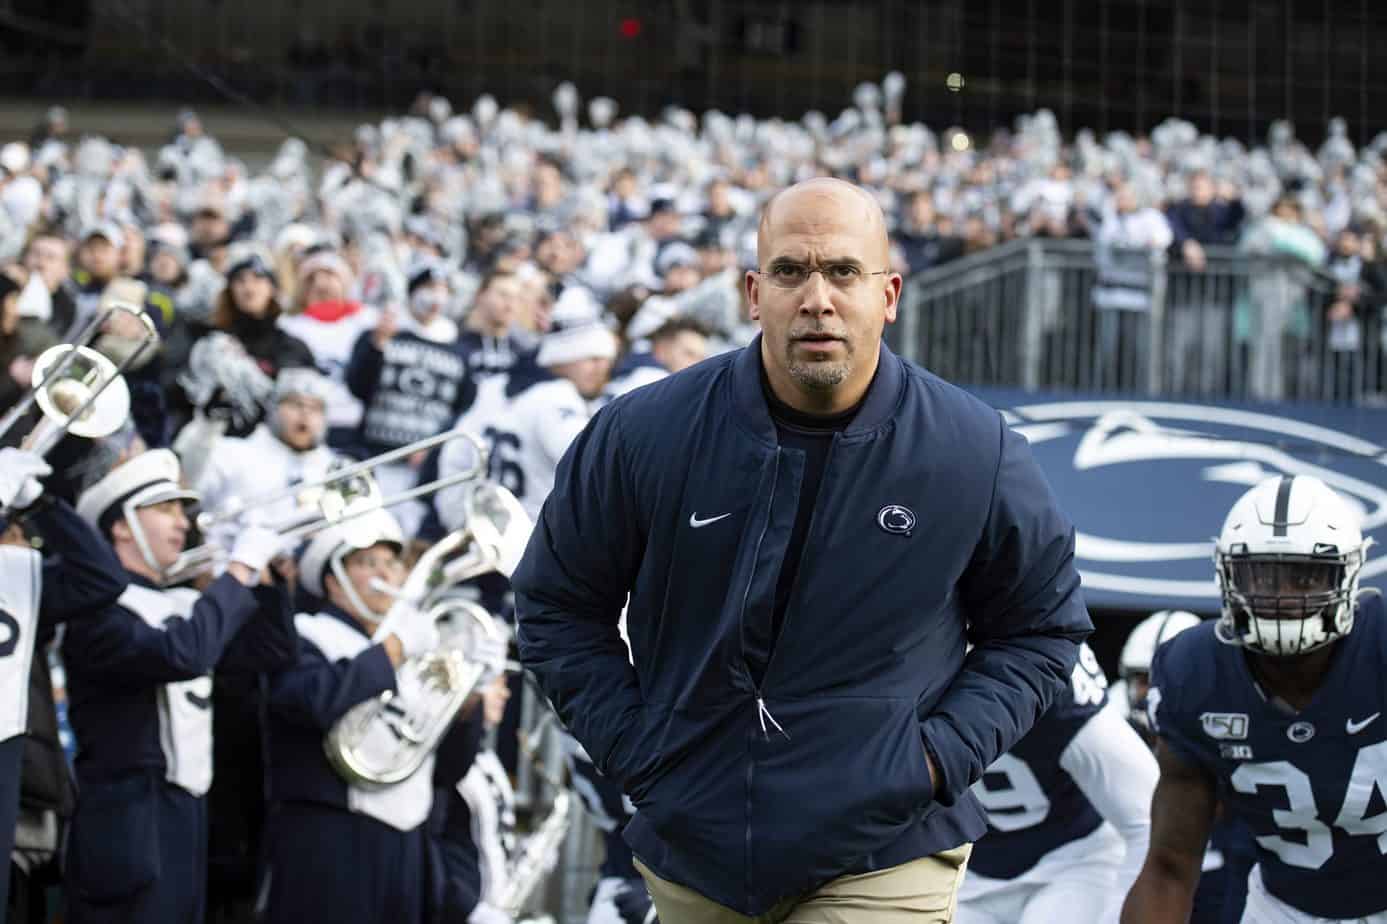 Penn State coach James Franklin is apparently oblivious to the fact that he isn't traveling to Ohio State to play at "The Big House" this week